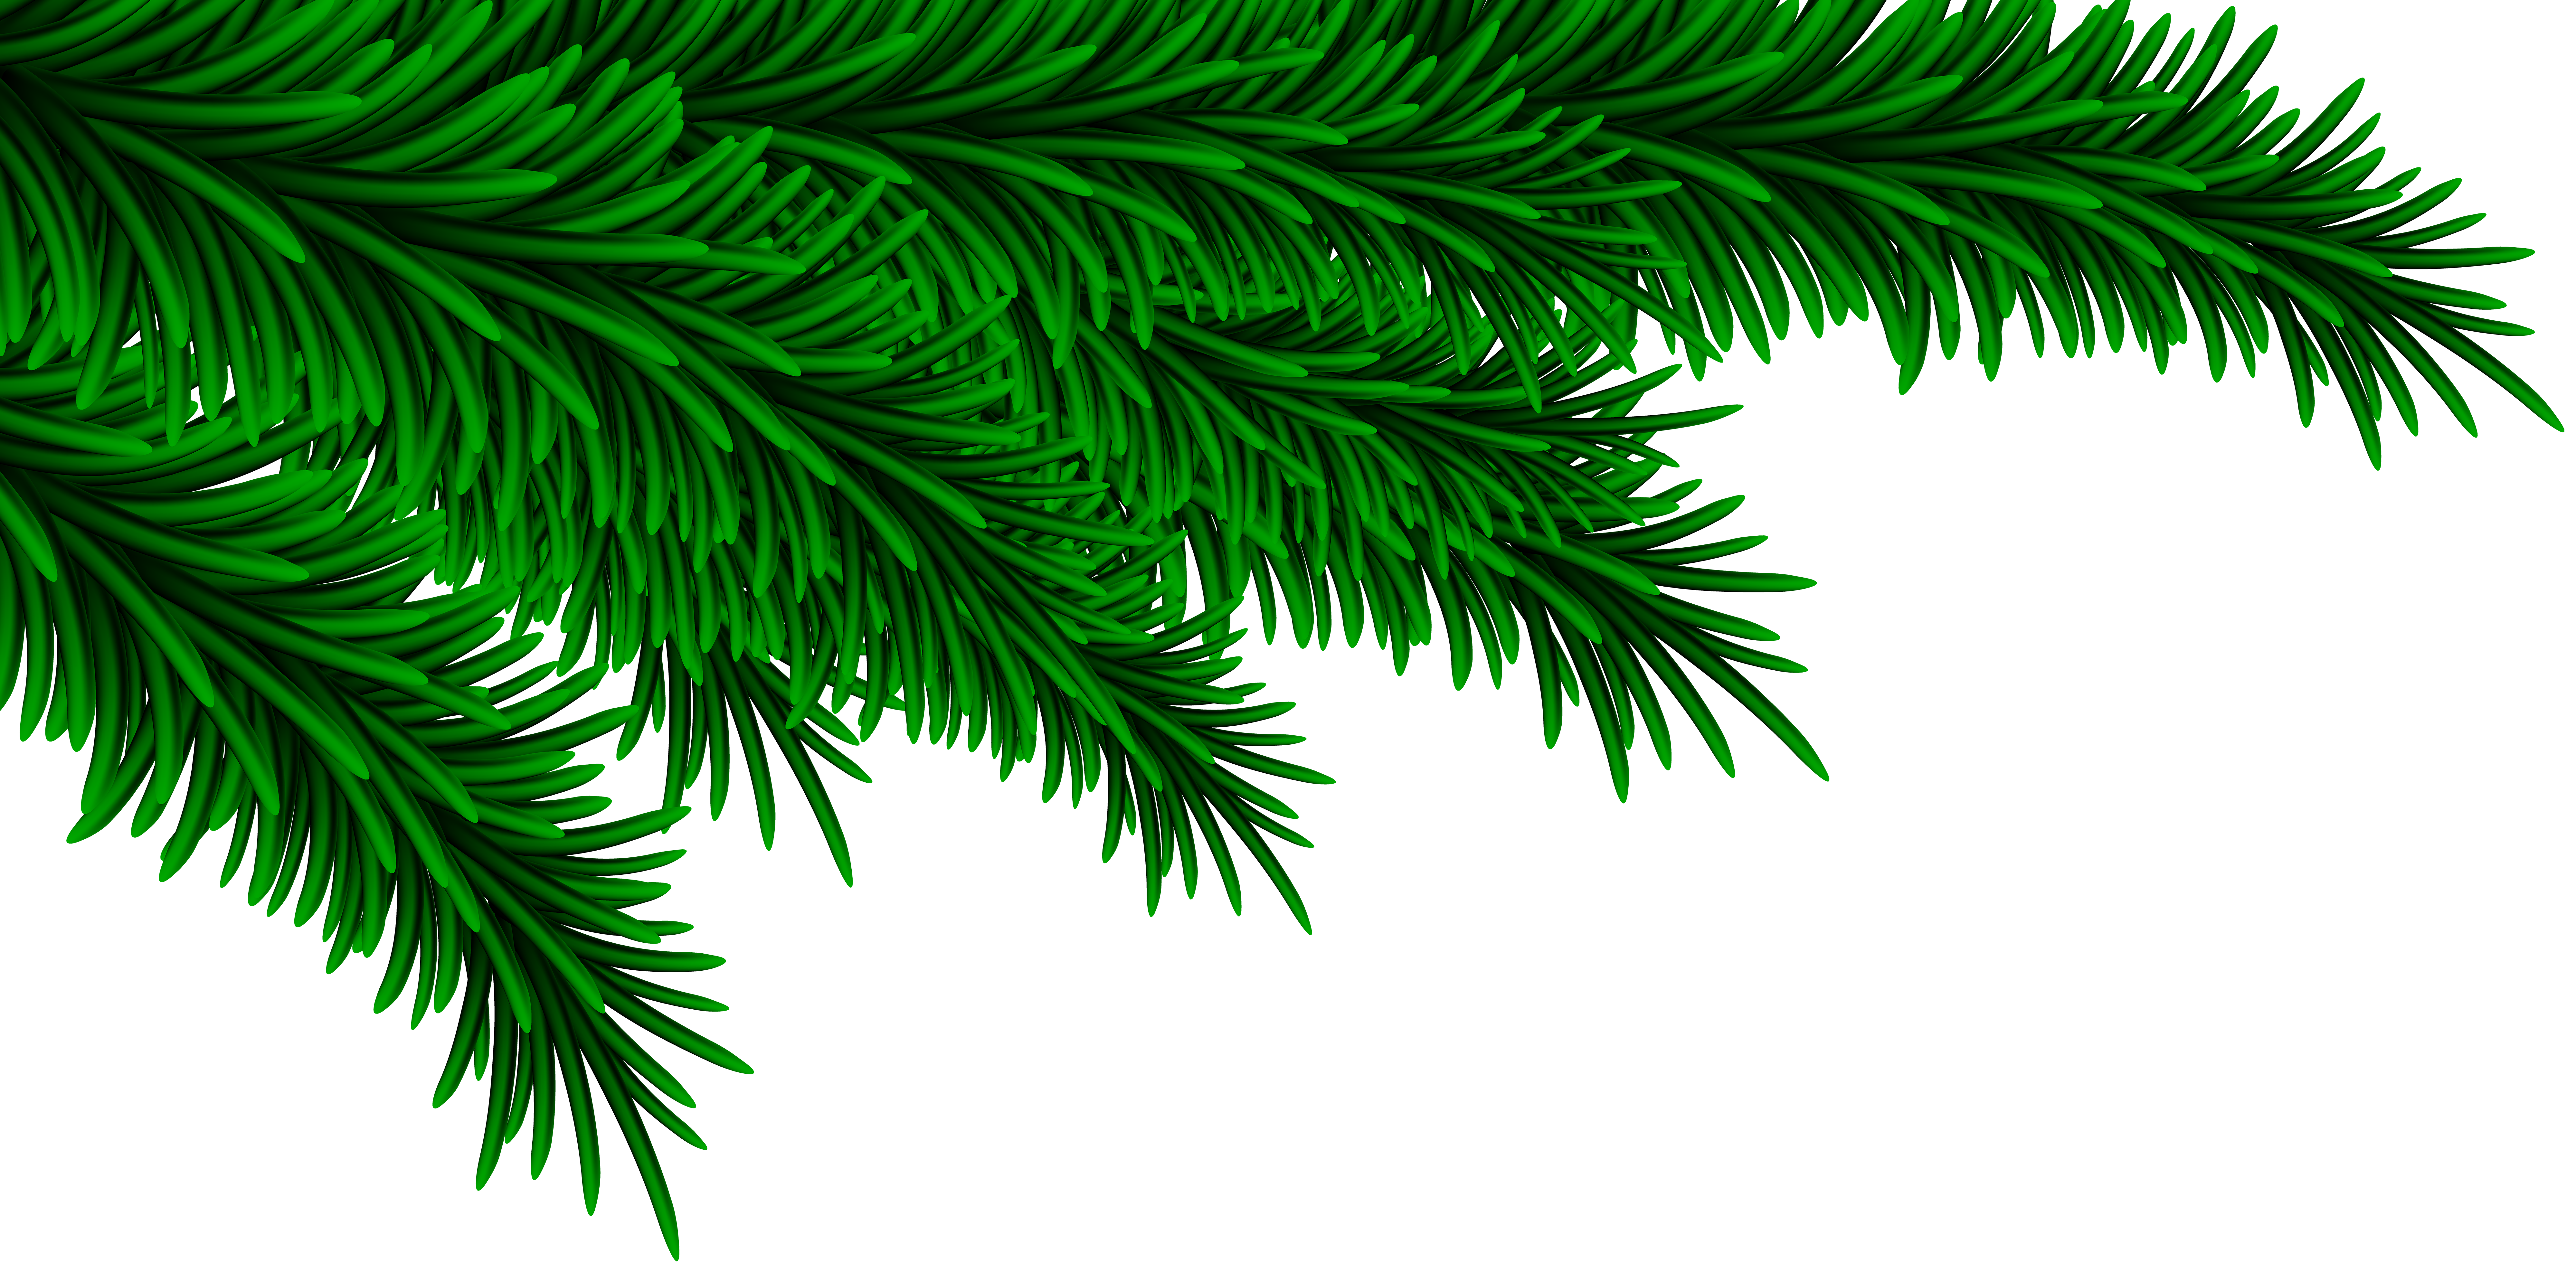 Christmas Pine Branches Decorating PNG Clip Art Image​  Gallery  Yopriceville - High-Quality Free Images and Transparent PNG Clipart